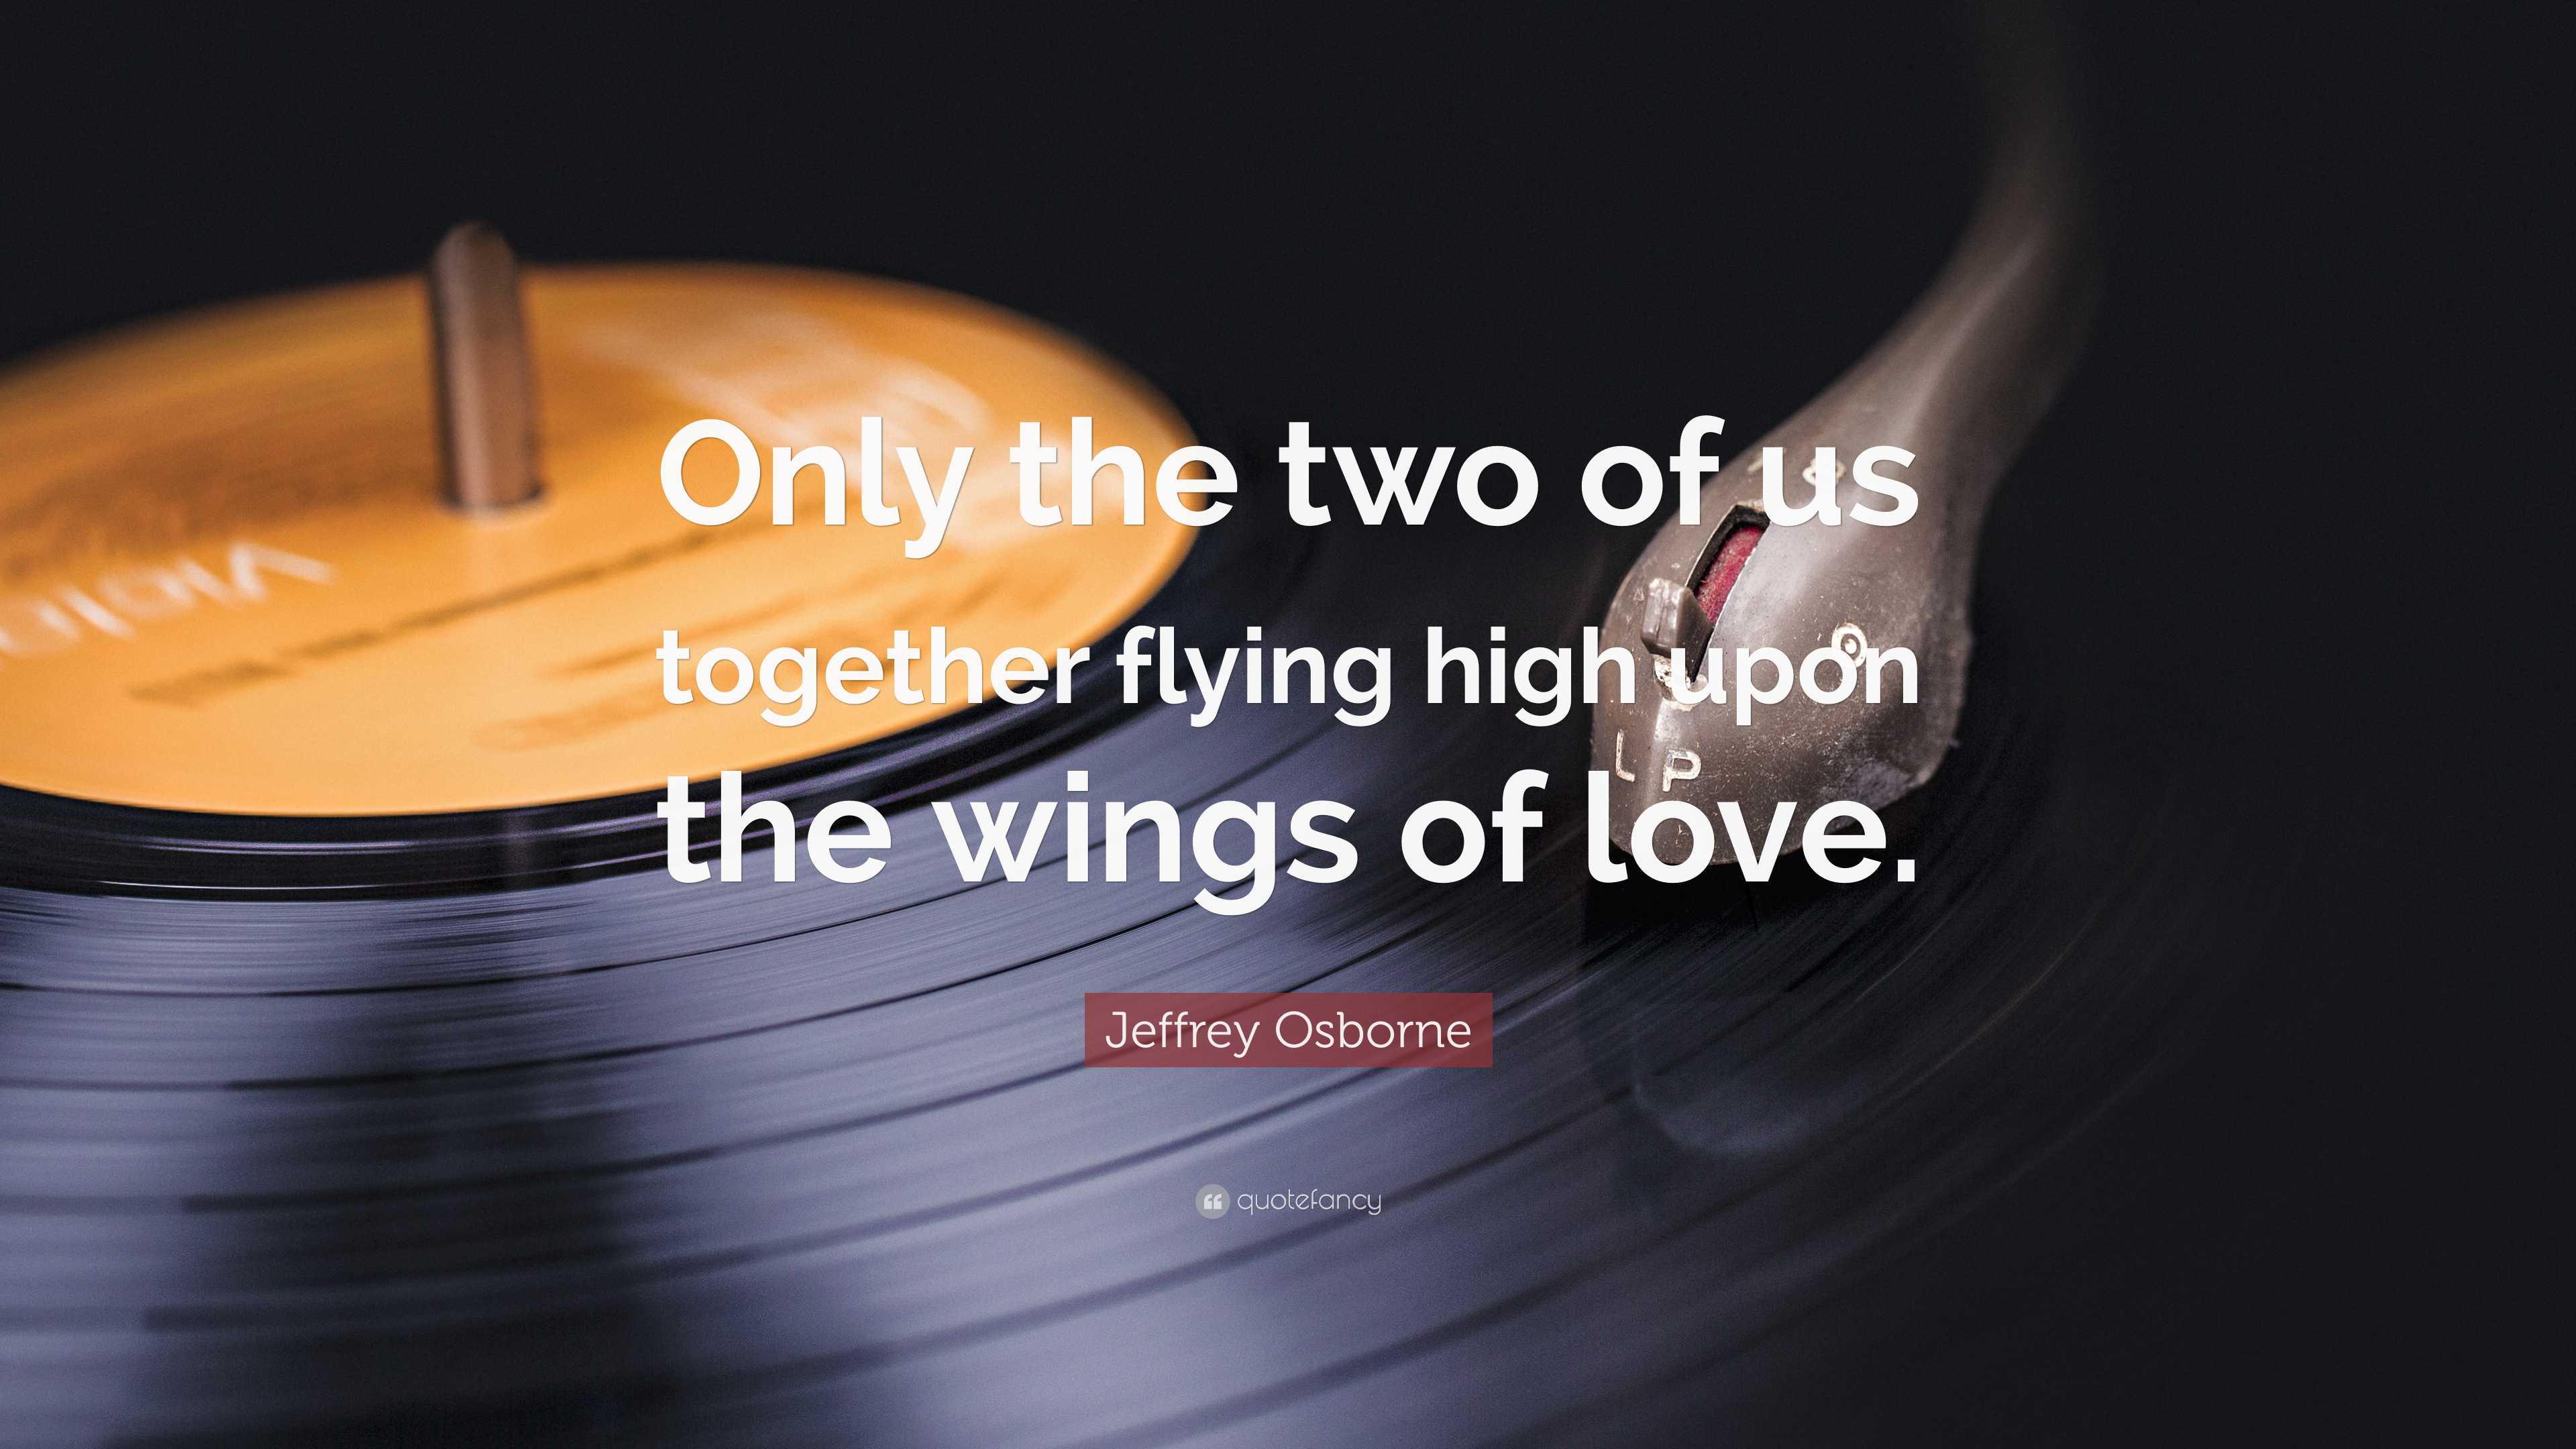 Jeffrey Osborne Quote: “Only the two of us together flying high upon the  wings of love.”